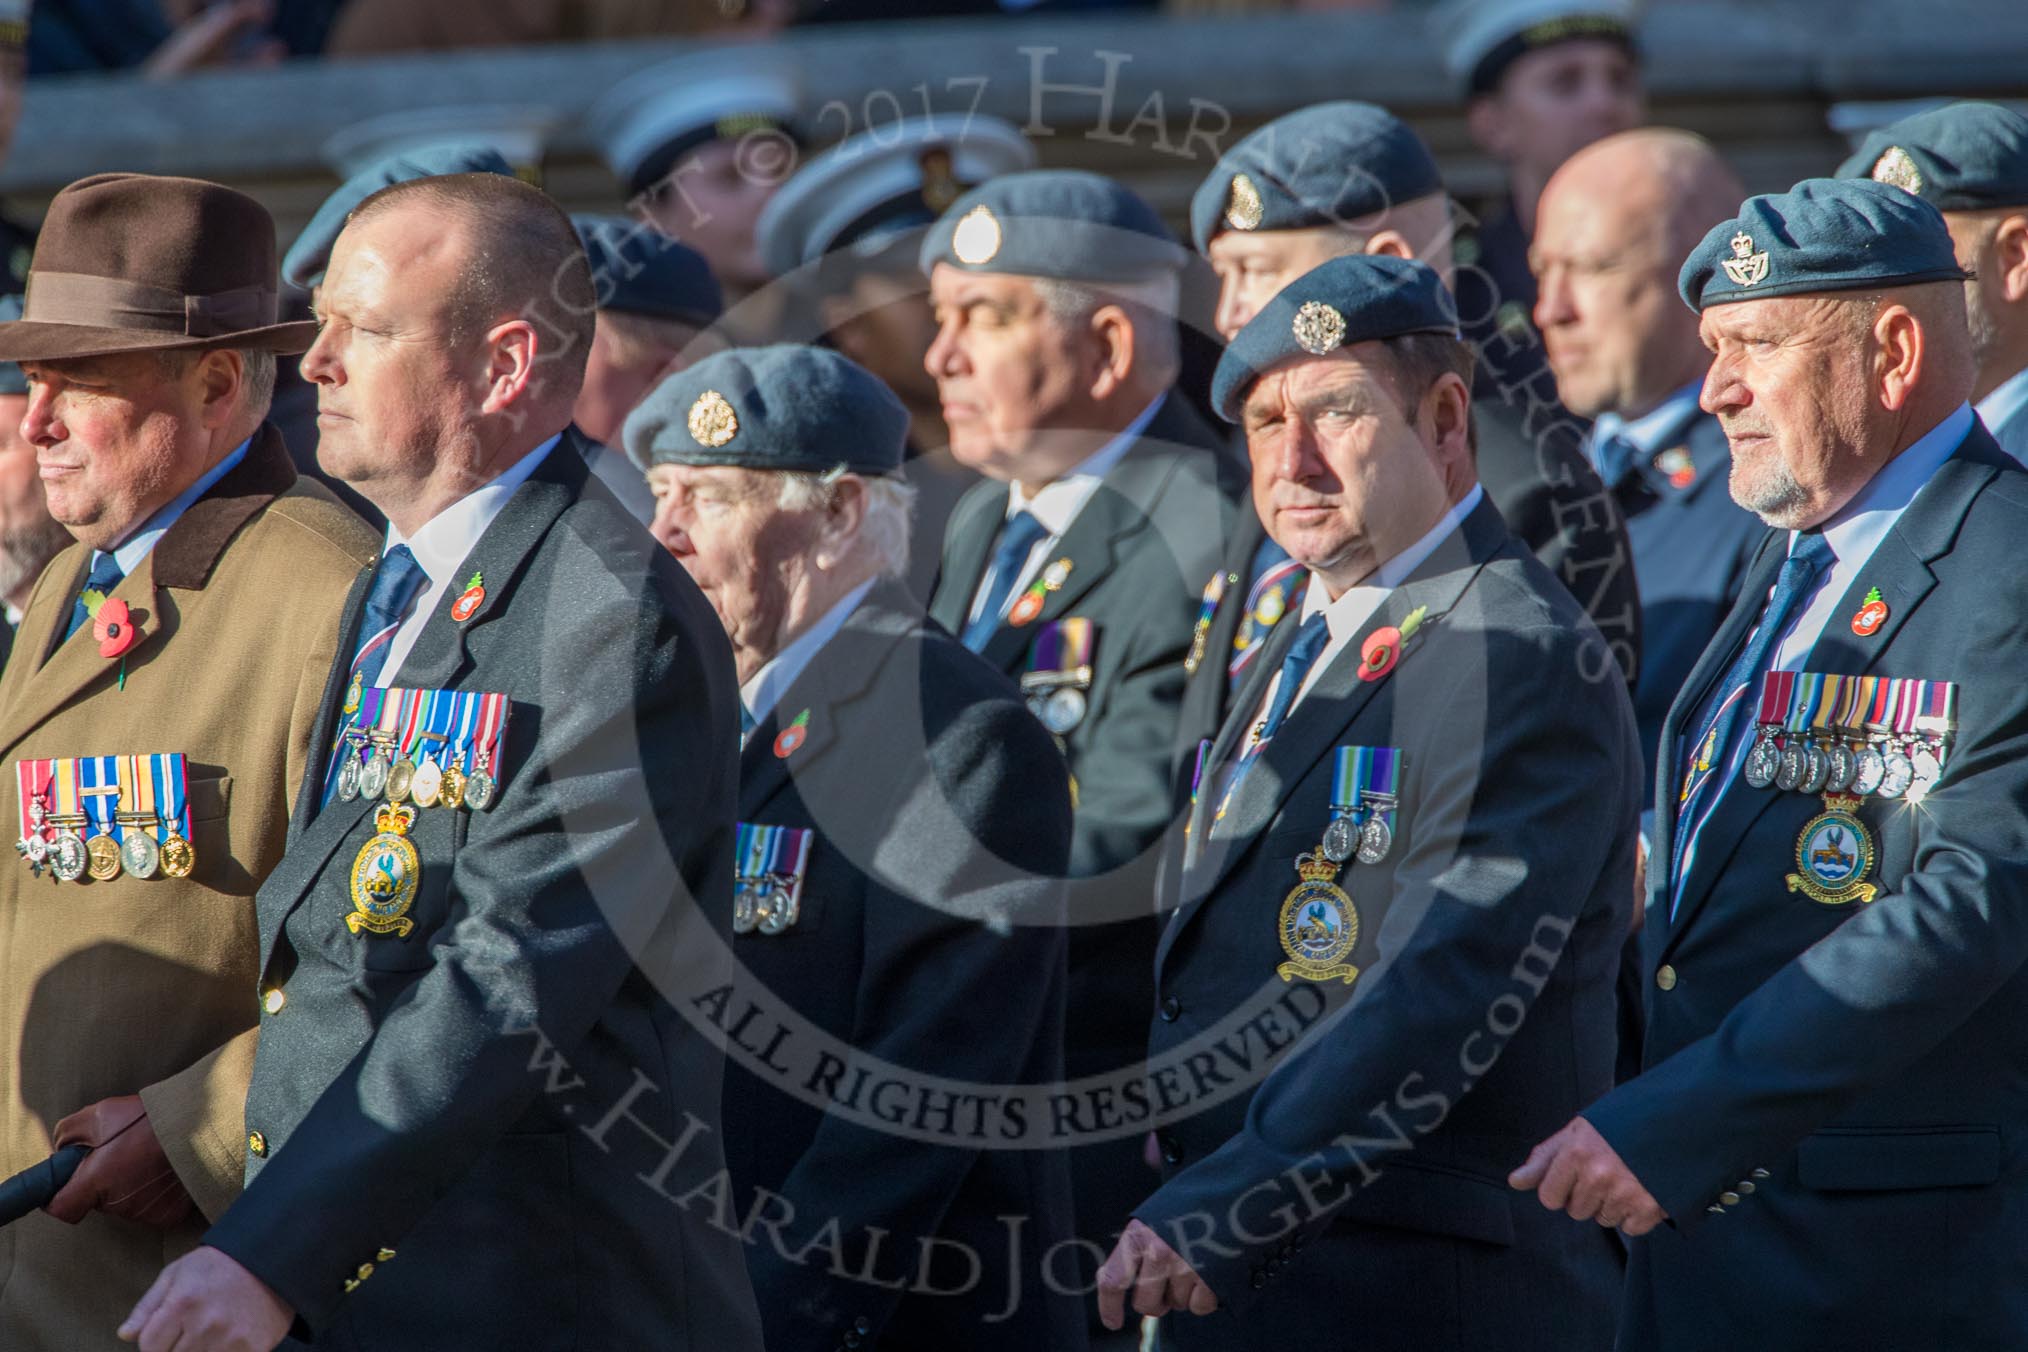 Royal Air Force Servicing Commando and Tactical Supply Wing Association (Group C36, 50 members) during the Royal British Legion March Past on Remembrance Sunday at the Cenotaph, Whitehall, Westminster, London, 11 November 2018, 12:20.